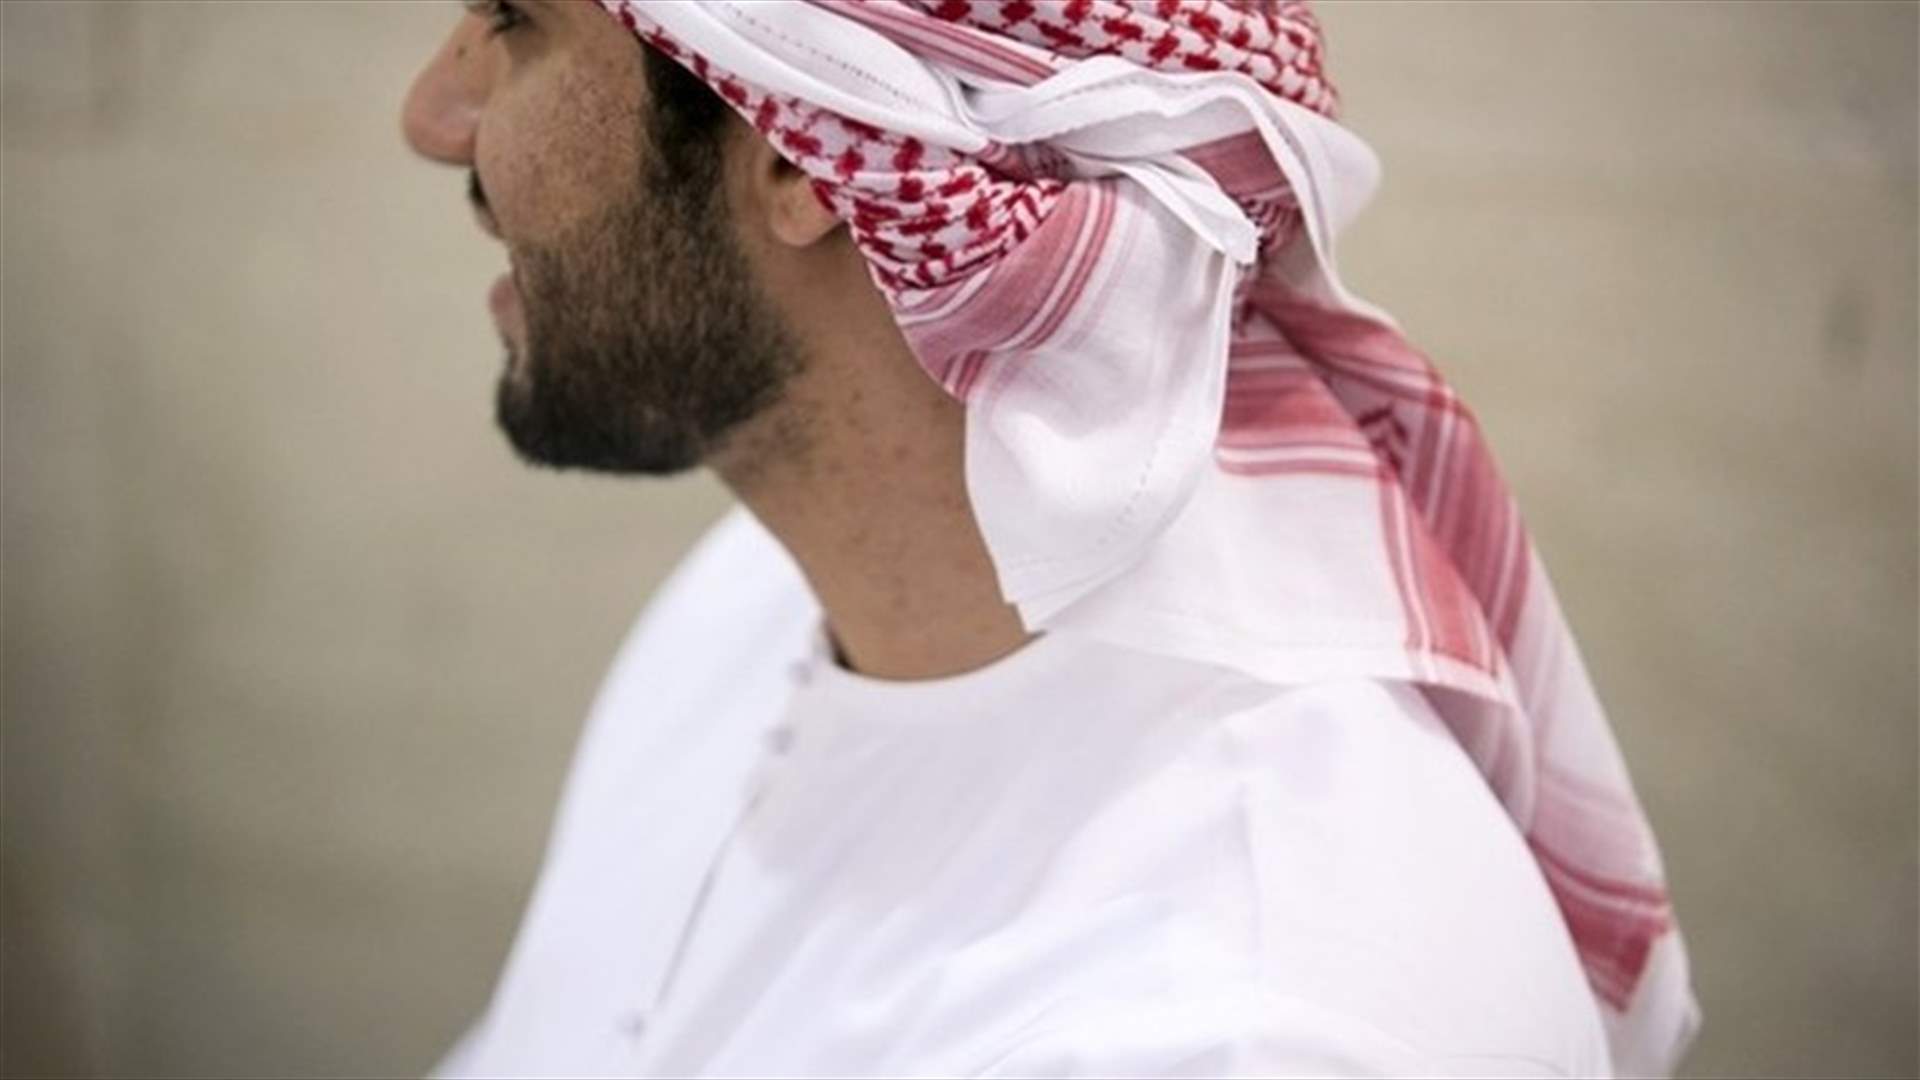 UAE tells citizens to avoid national dress while abroad after man held in US